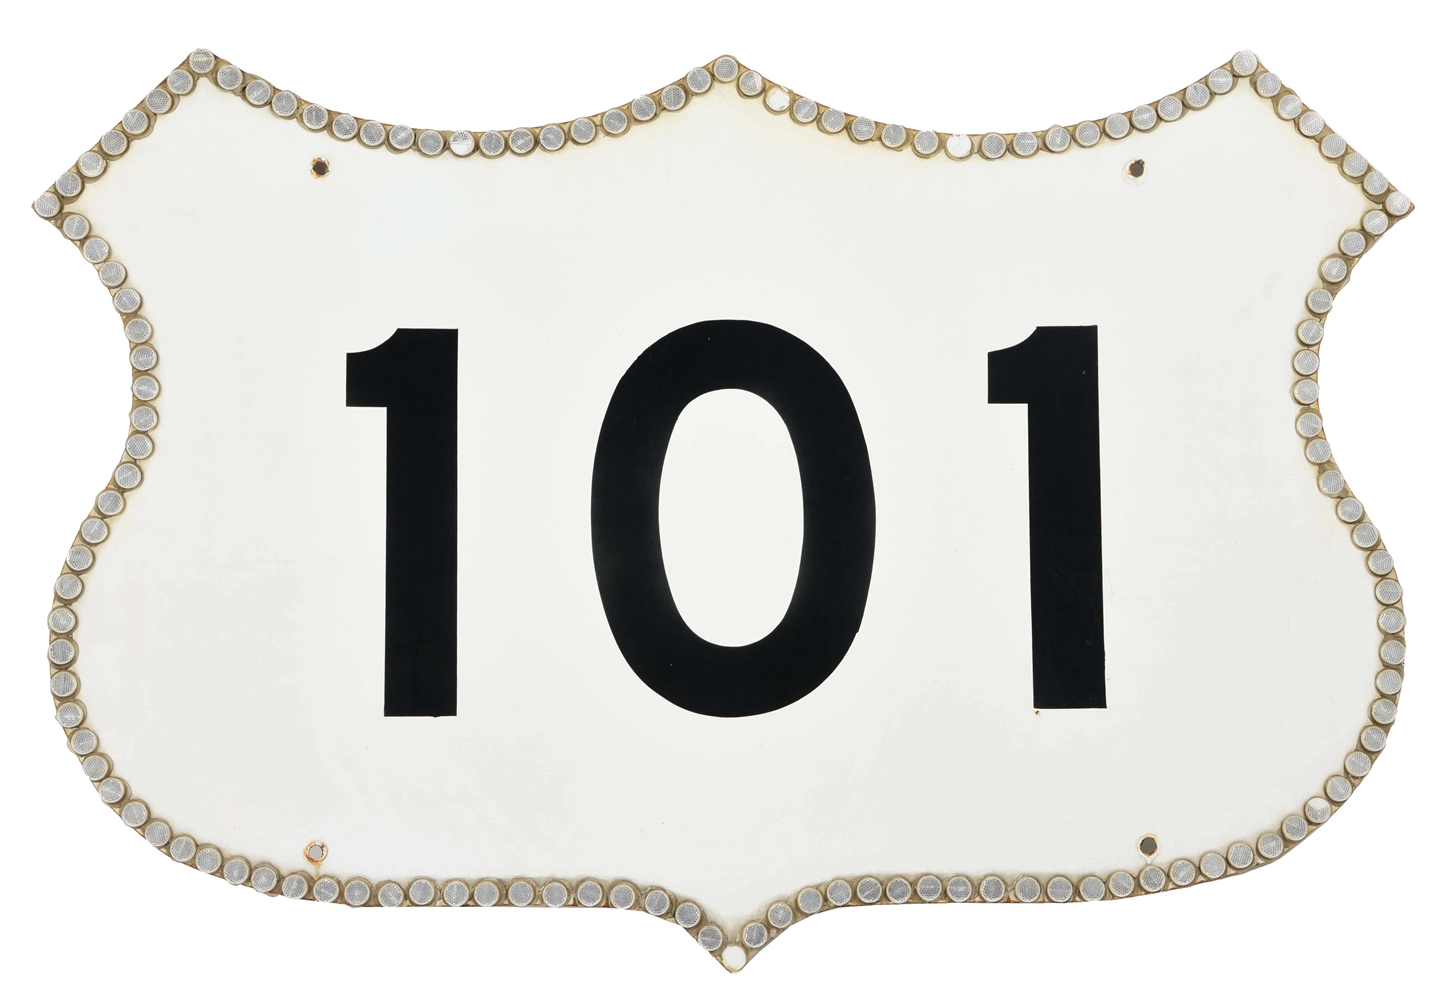 OUTSTANDING ROUTE 101 PORCELAIN SIGN.